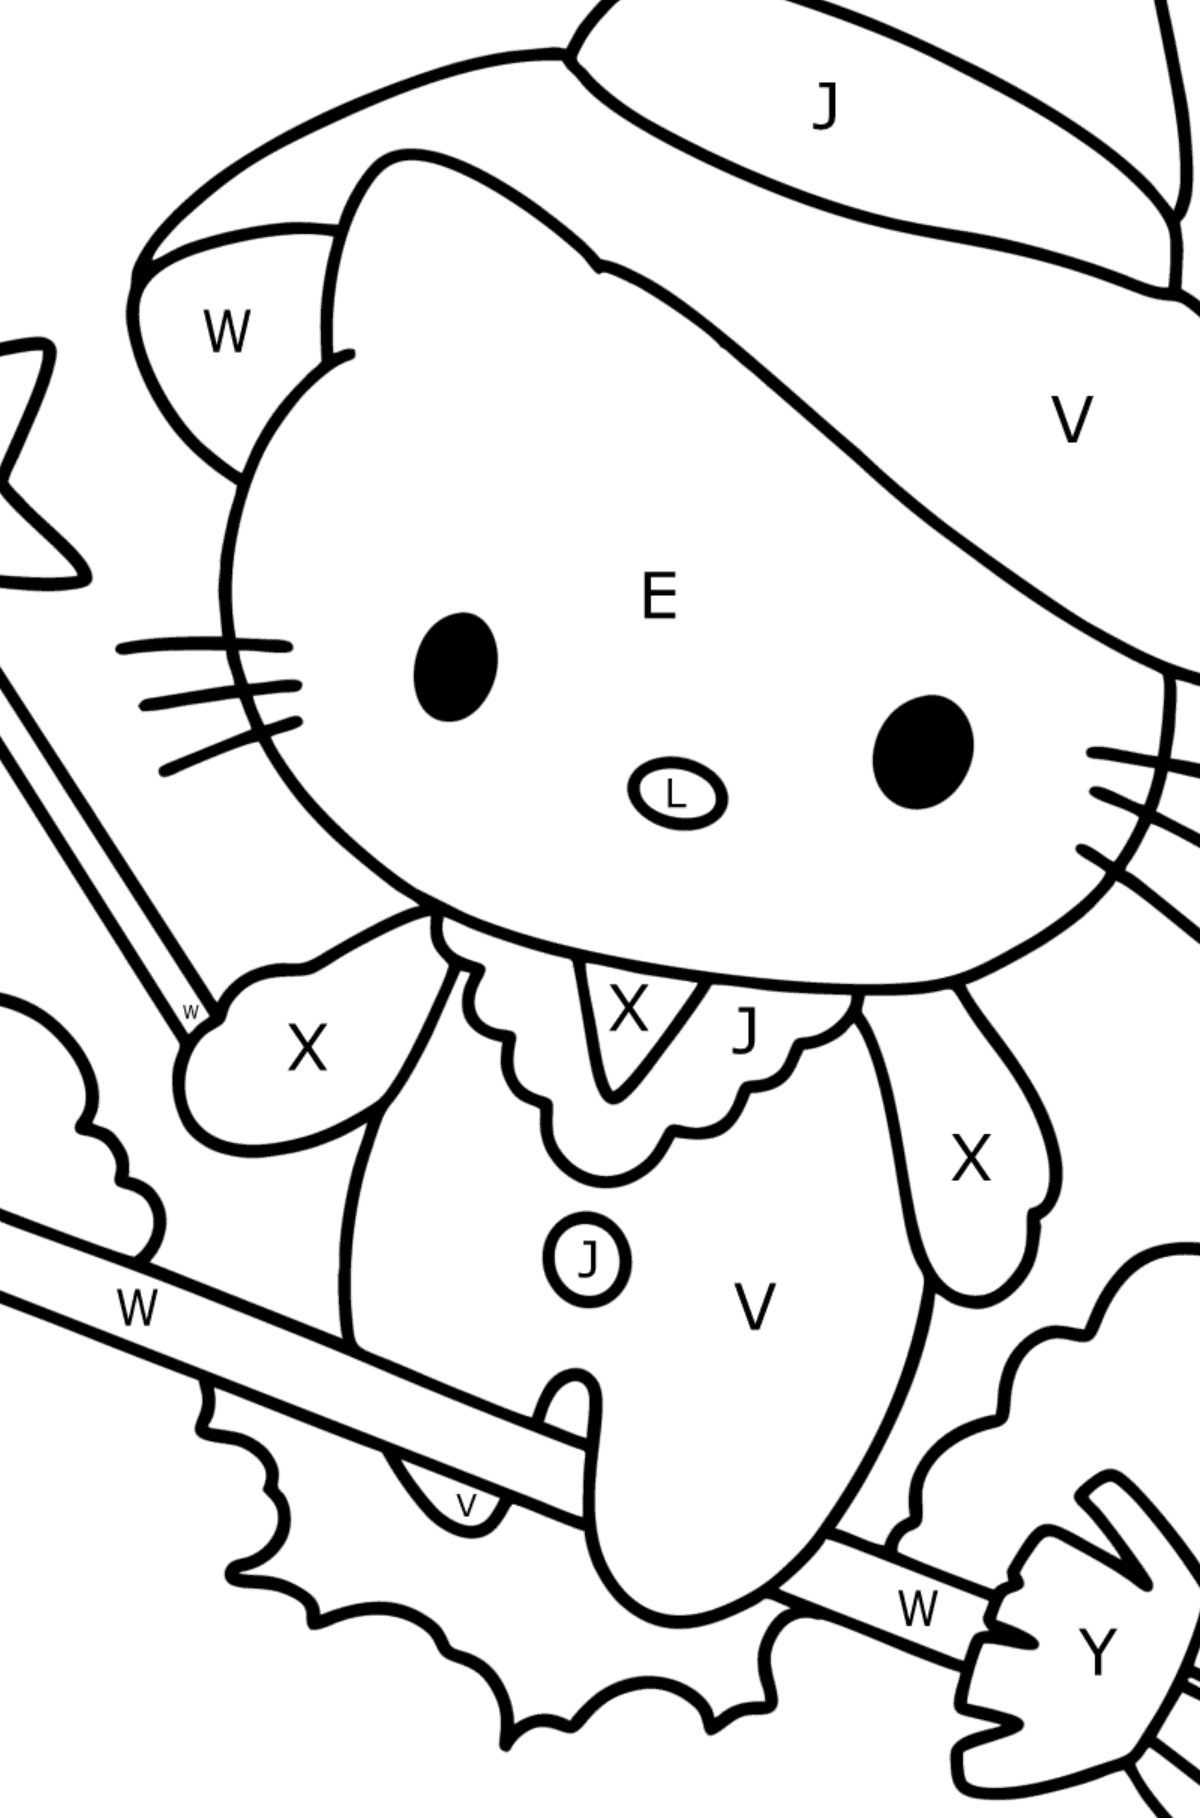 Hello Kitty Halloween coloring page - Coloring by Letters for Kids